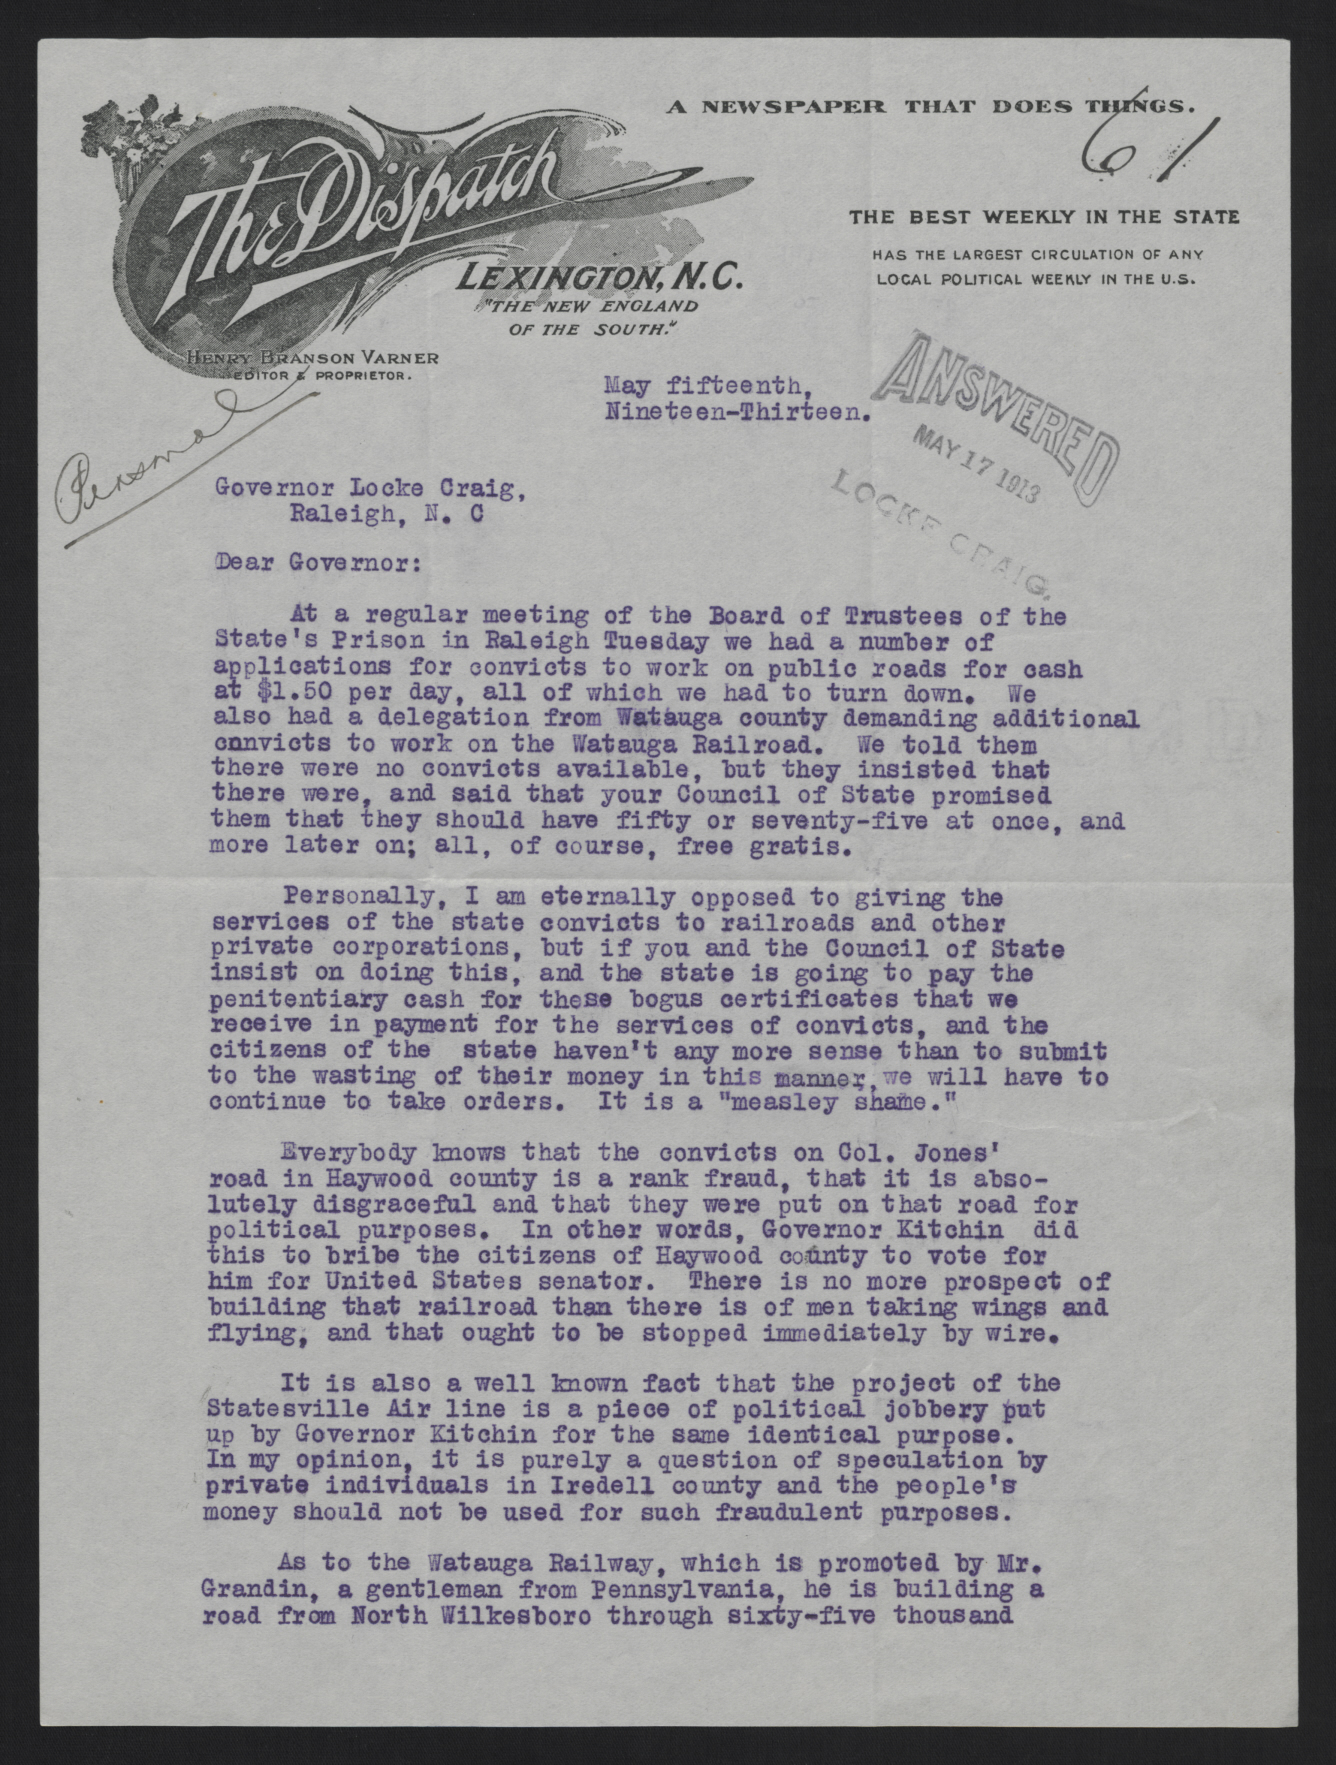 Letter from Varner to Craig, May 15, 1913, page 1